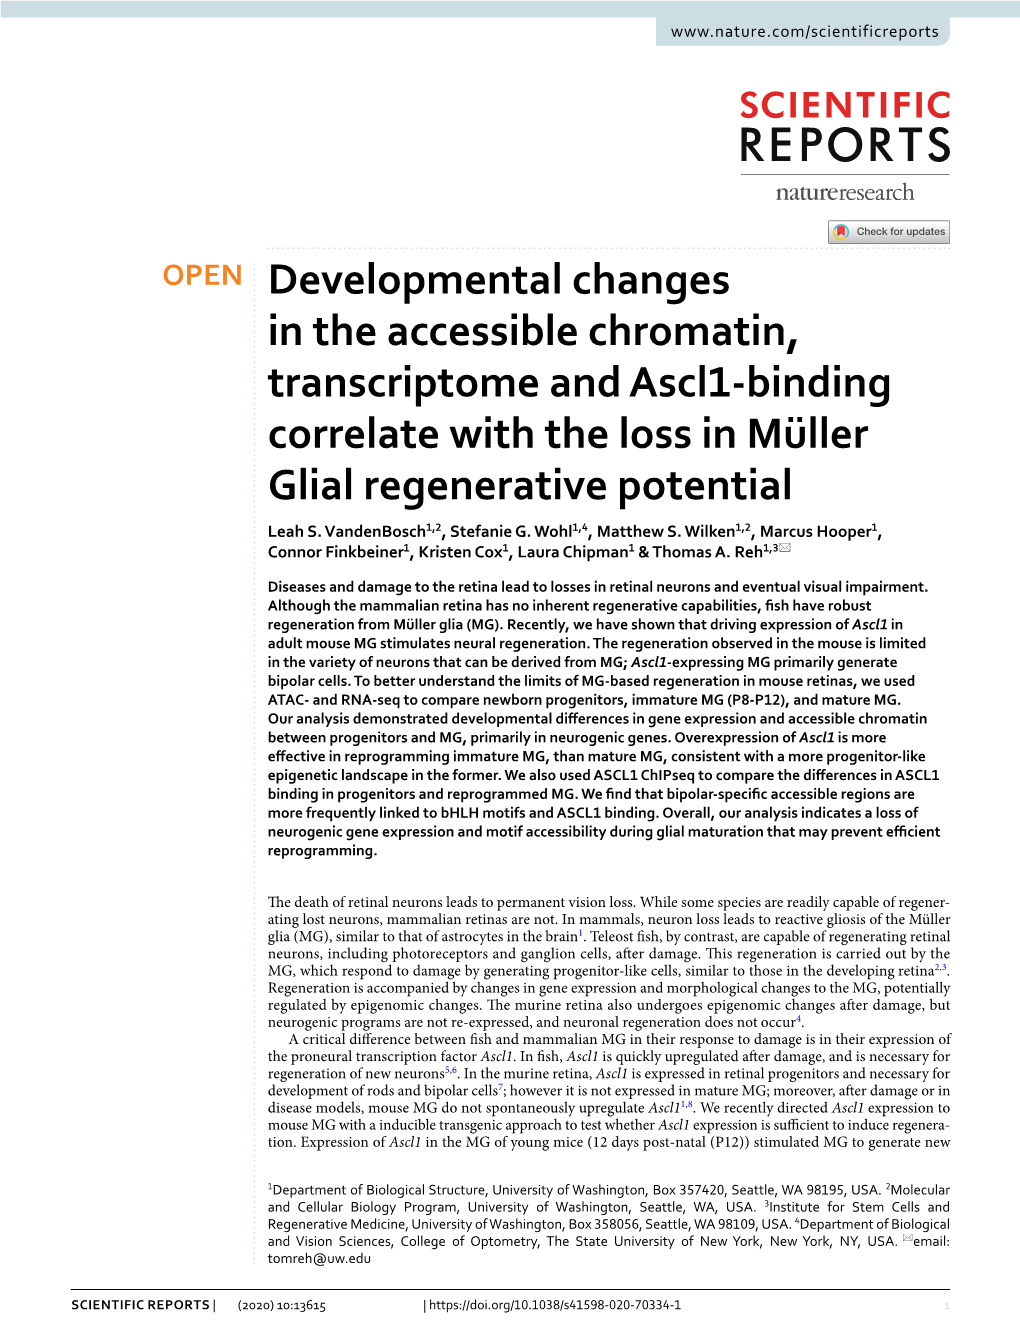 Developmental Changes in the Accessible Chromatin, Transcriptome and Ascl1‑Binding Correlate with the Loss in Müller Glial Regenerative Potential Leah S